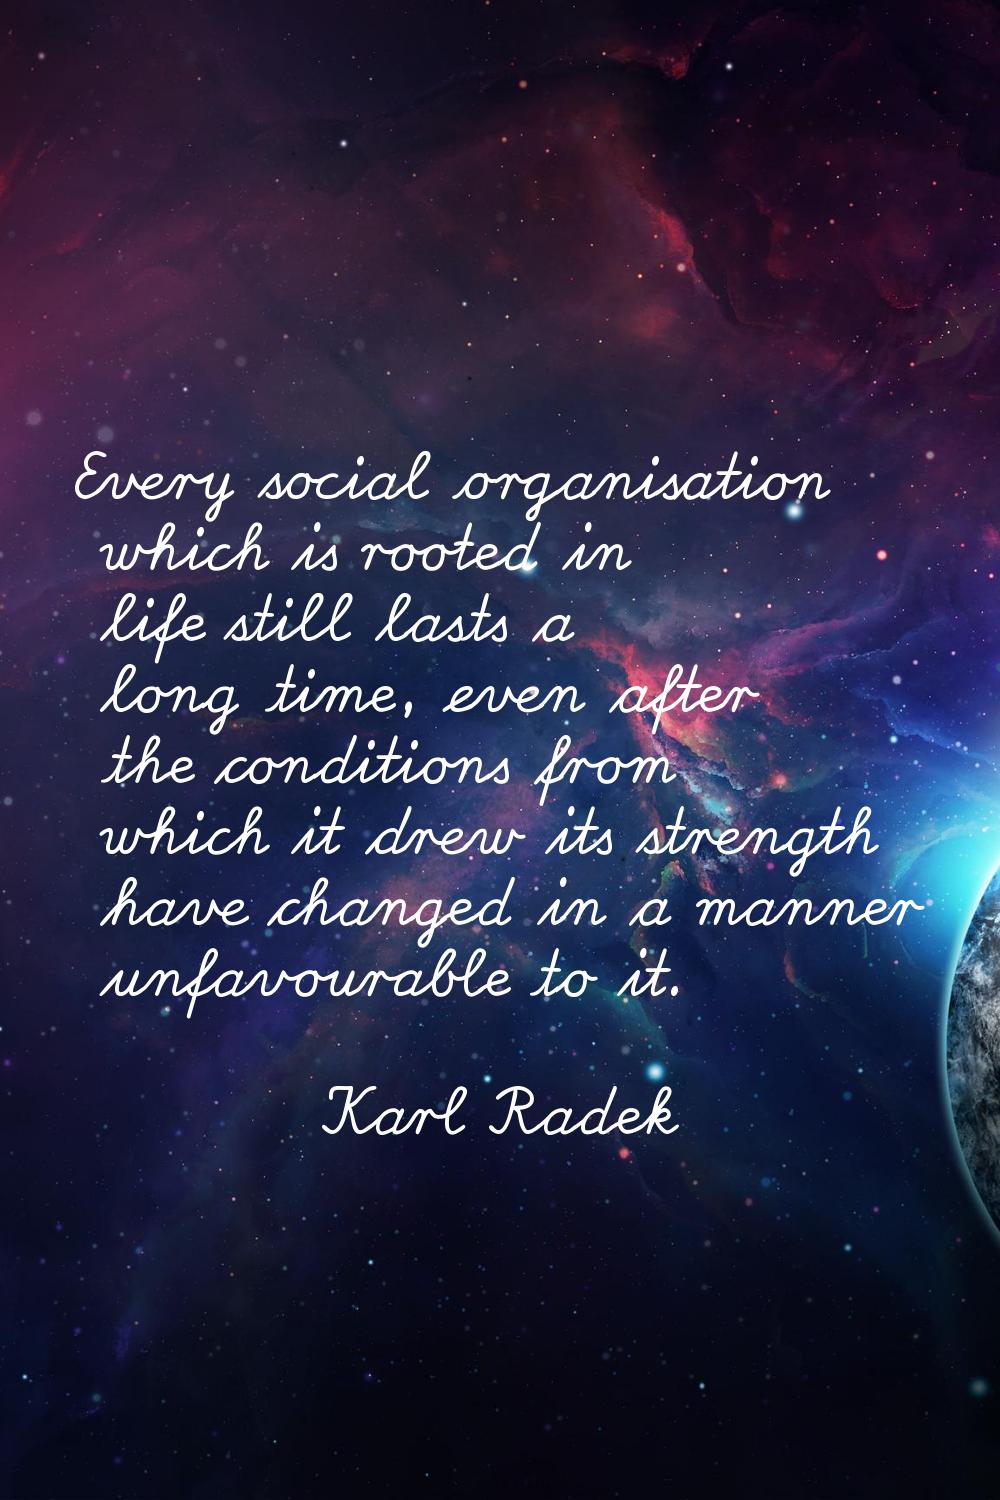 Every social organisation which is rooted in life still lasts a long time, even after the condition